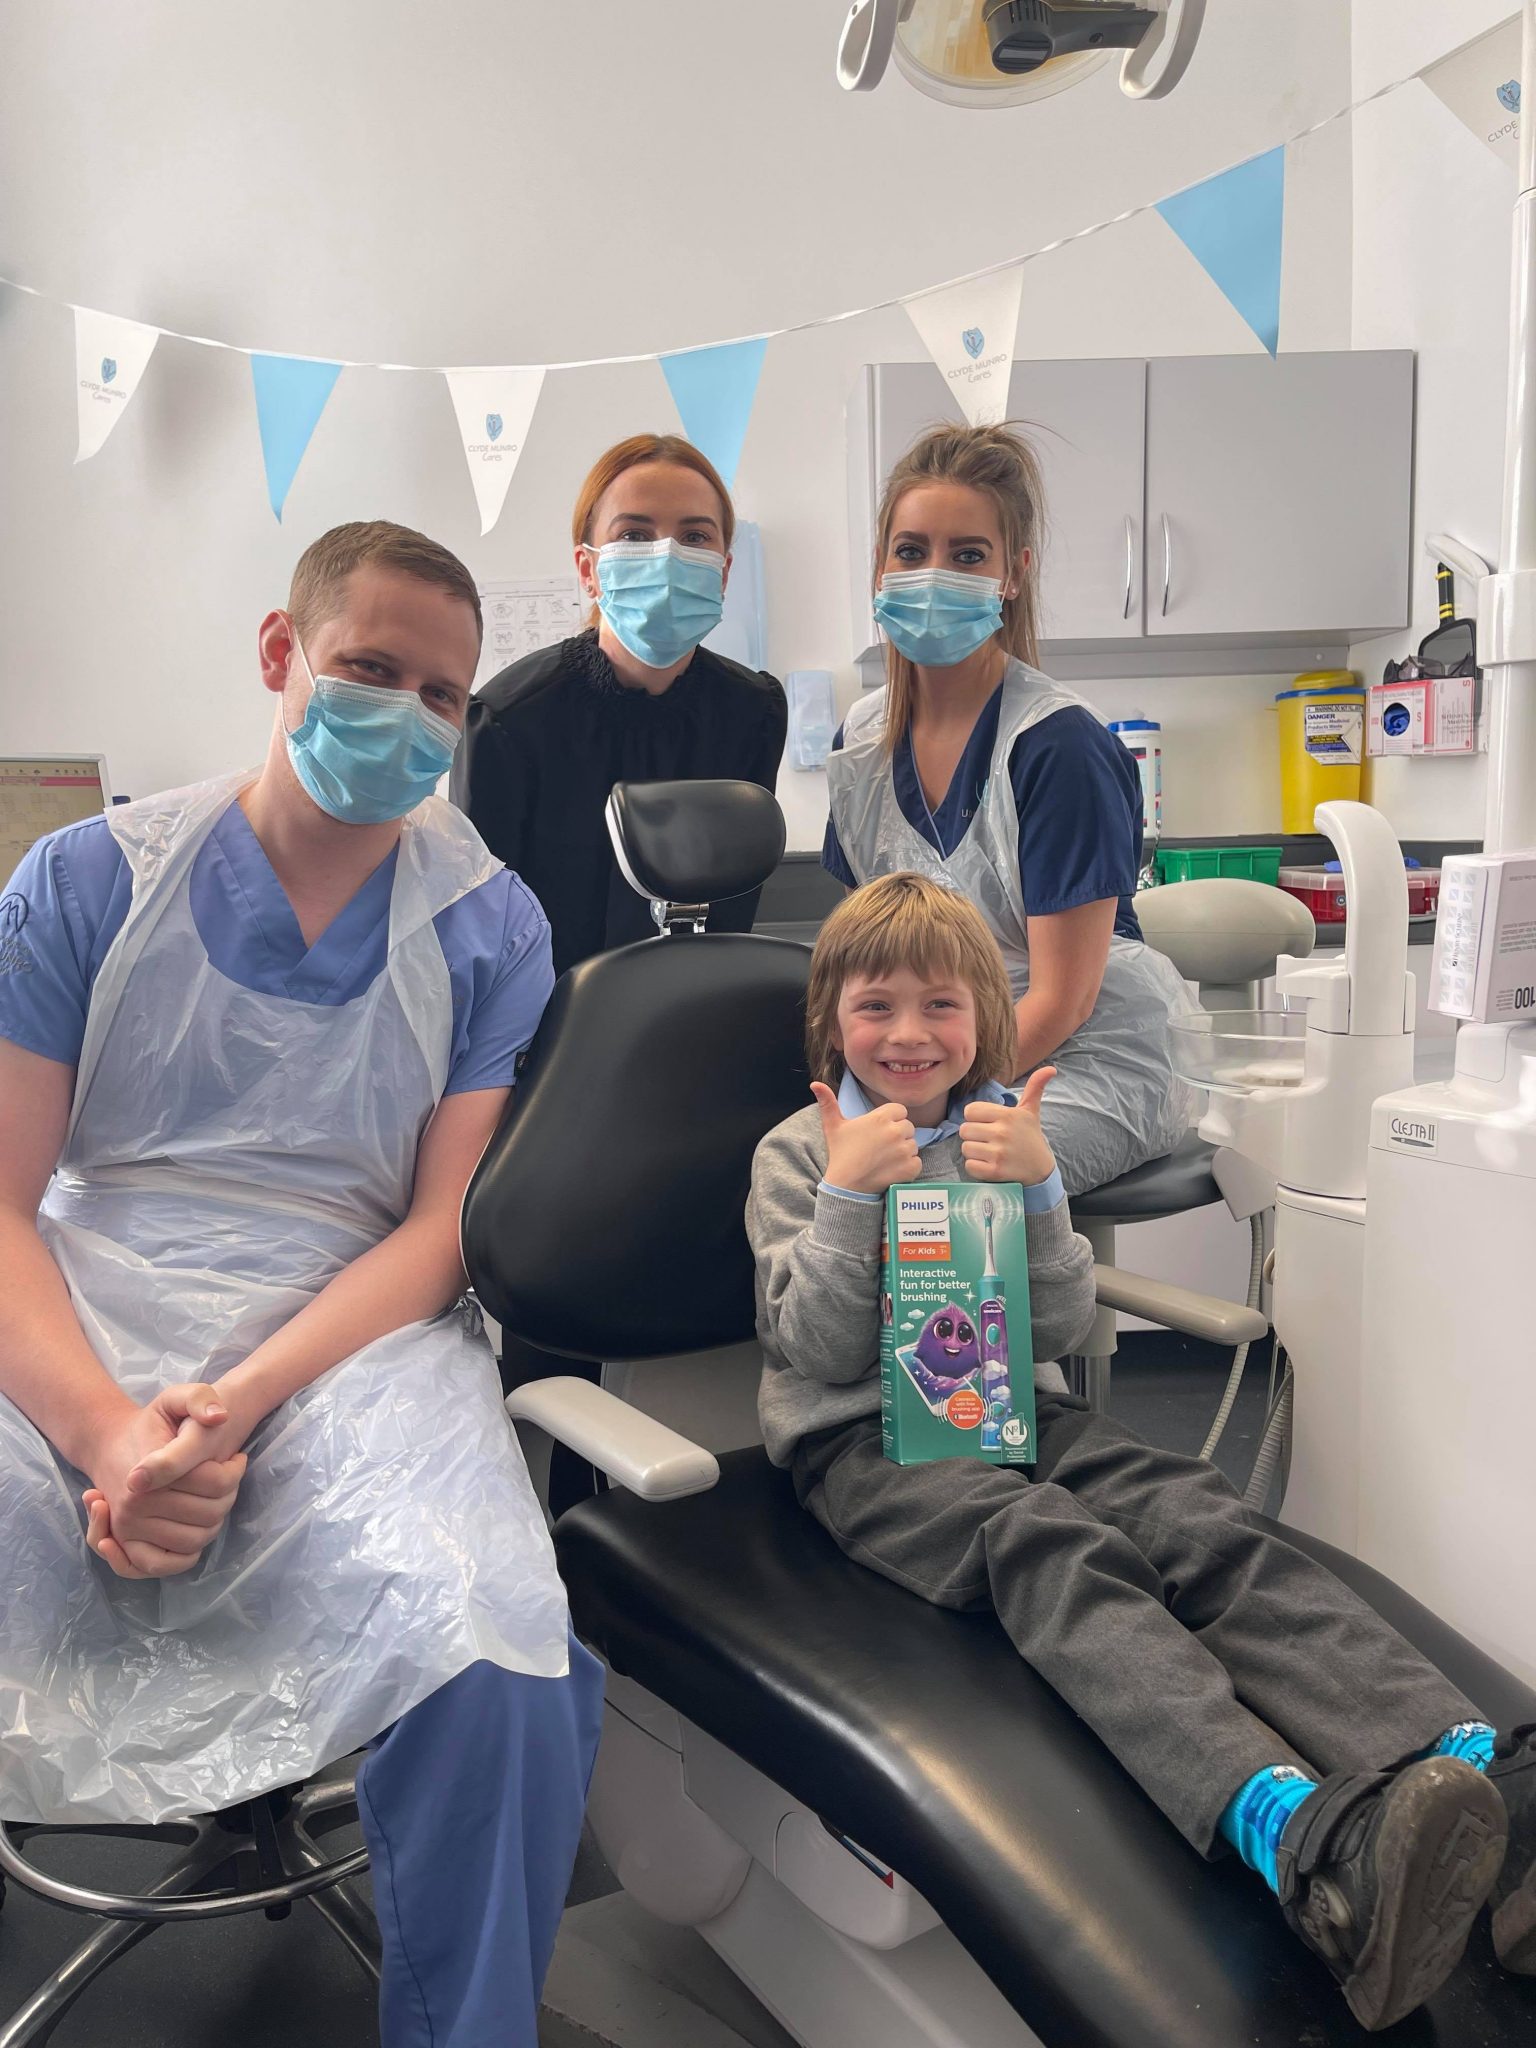 Volunteer dentists provide free treatment for over 100 children in Scotland